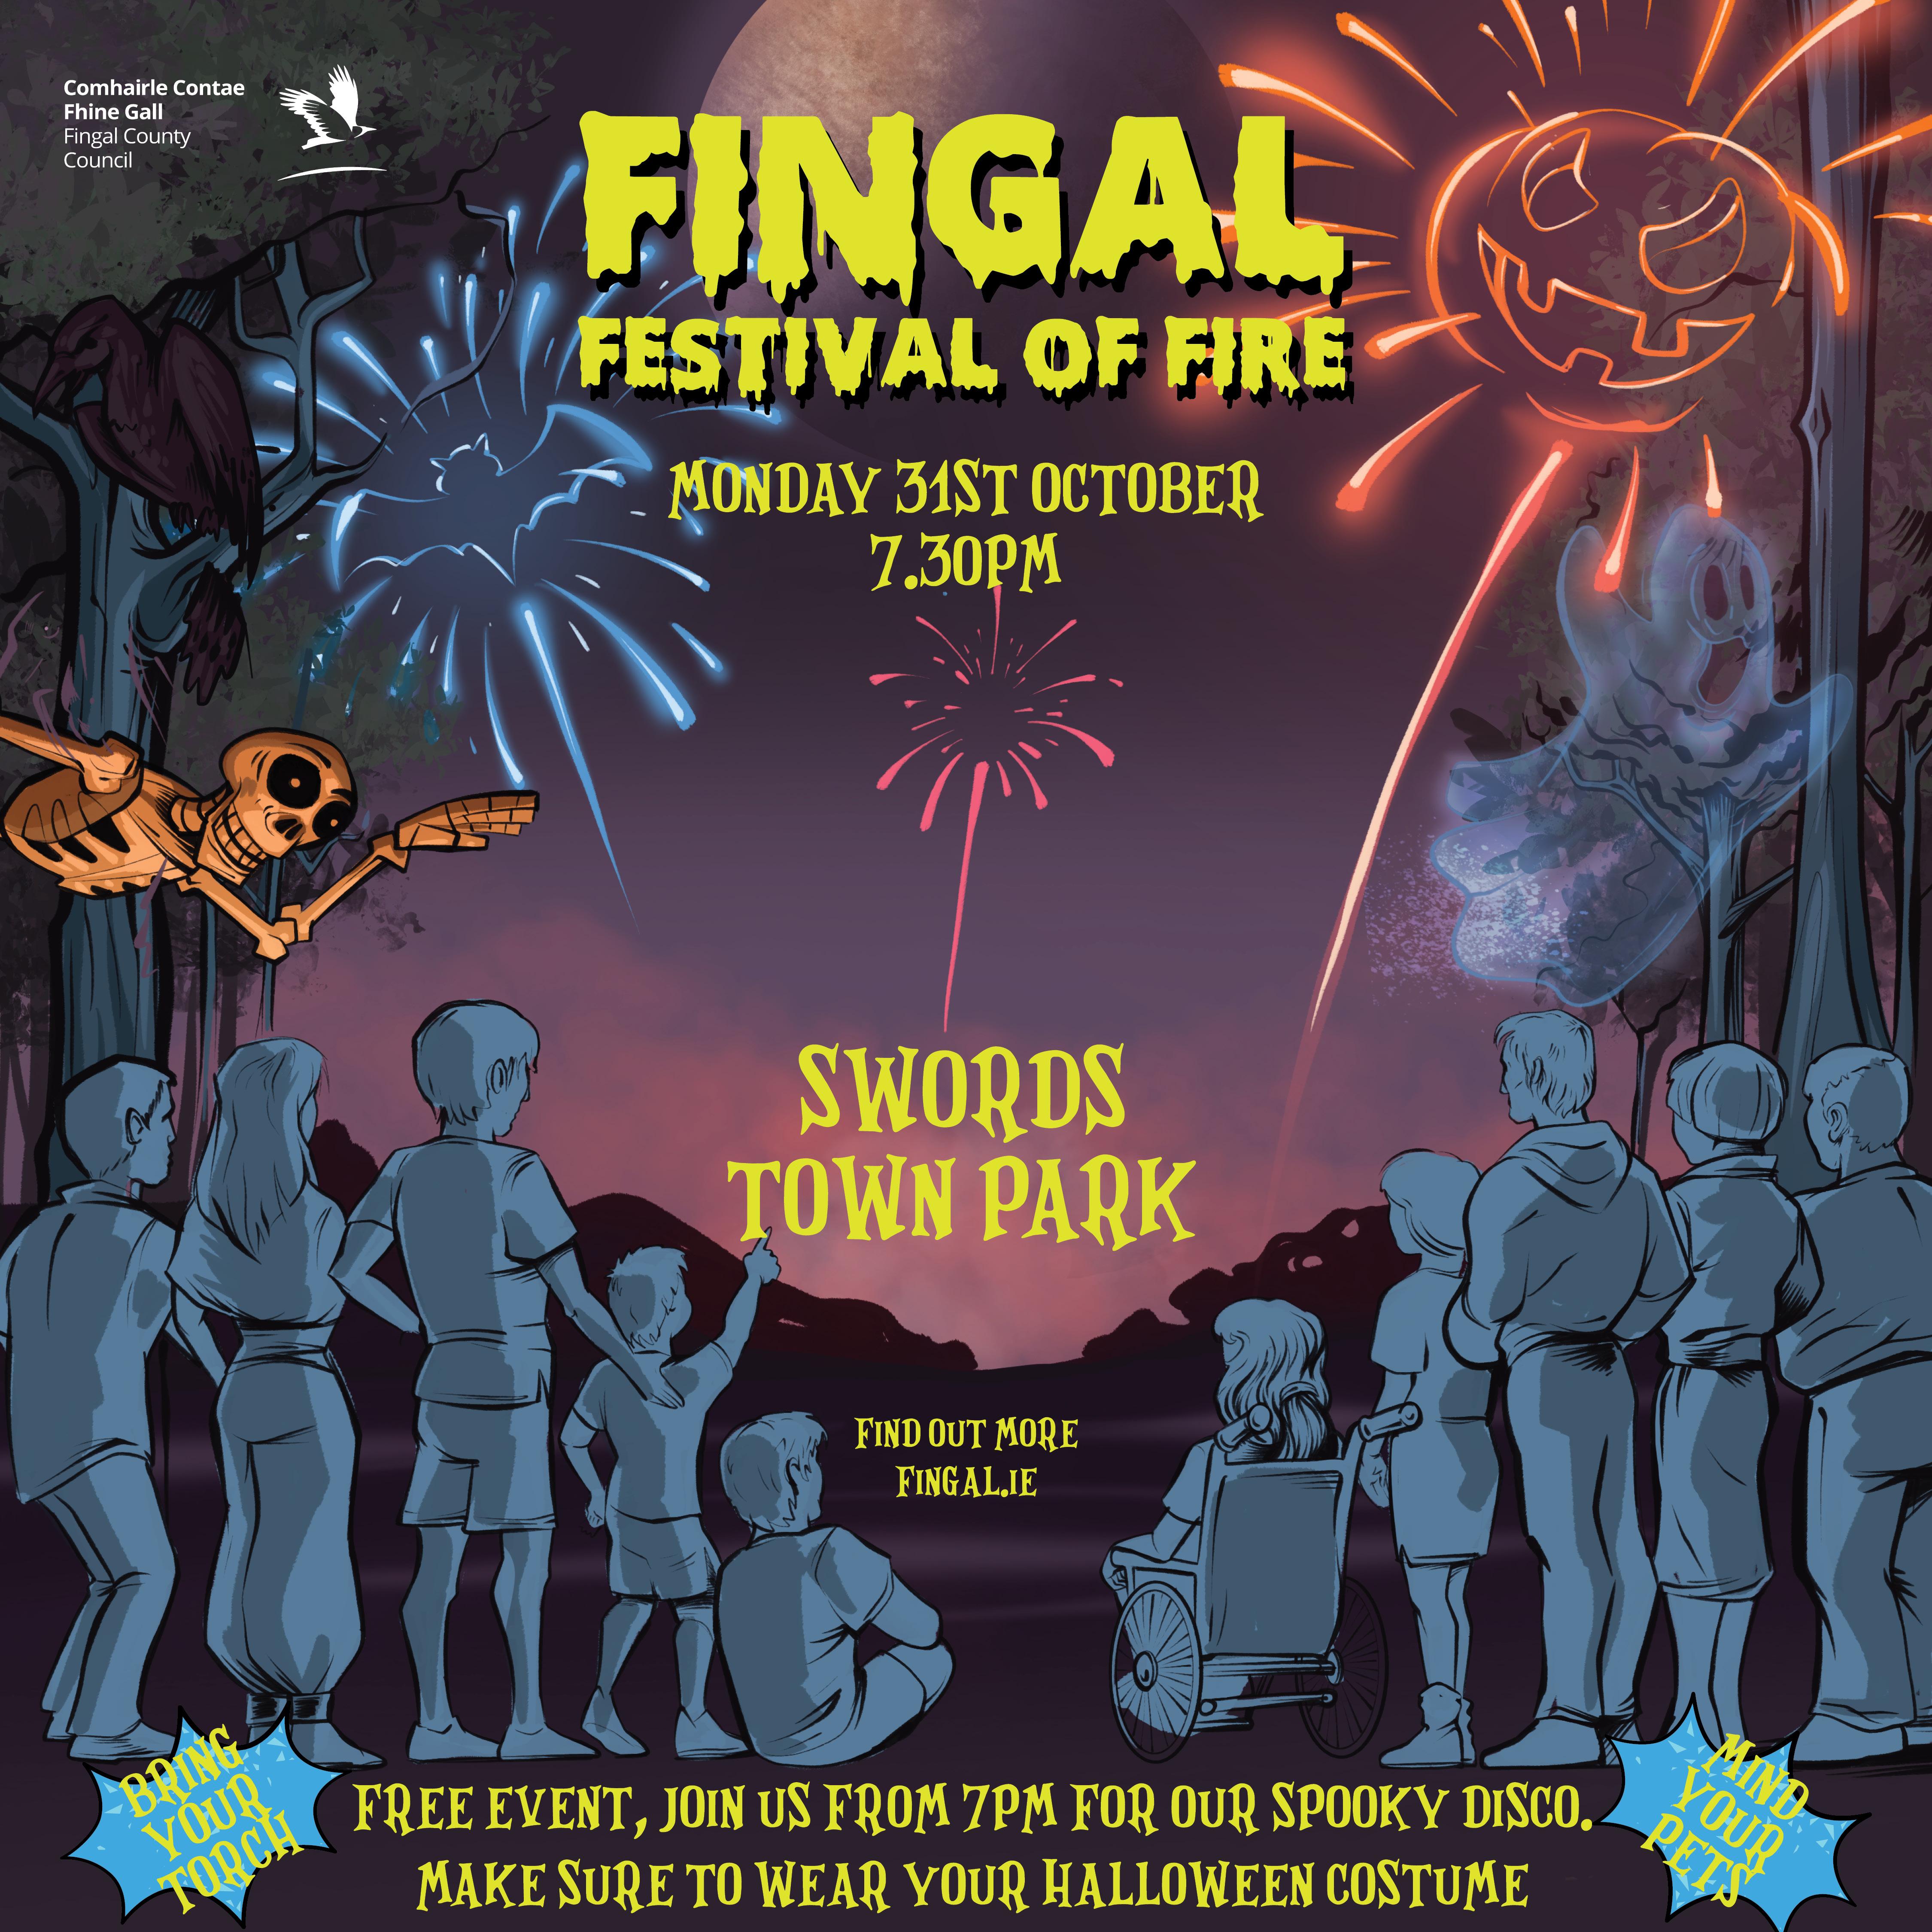 Halloween Festival of Fire | Fingal County Council